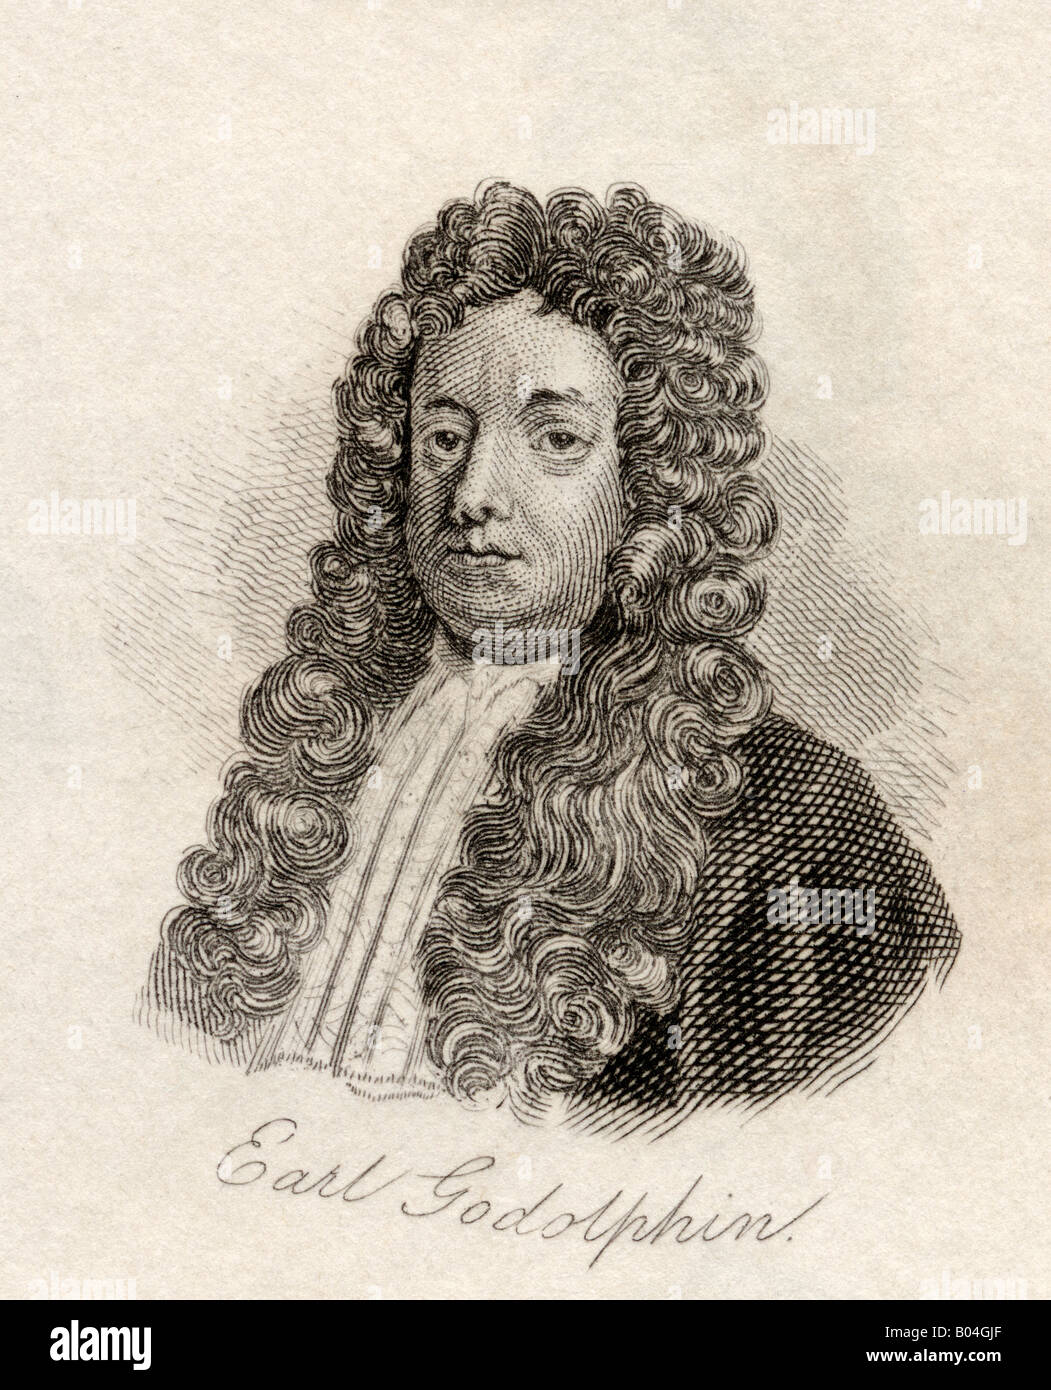 Sidney Godolphin, 1st Earl of Godolphin, 1645 - 1712. British politician. From the book Crabbs Historical Dictionary published 1825 Stock Photo